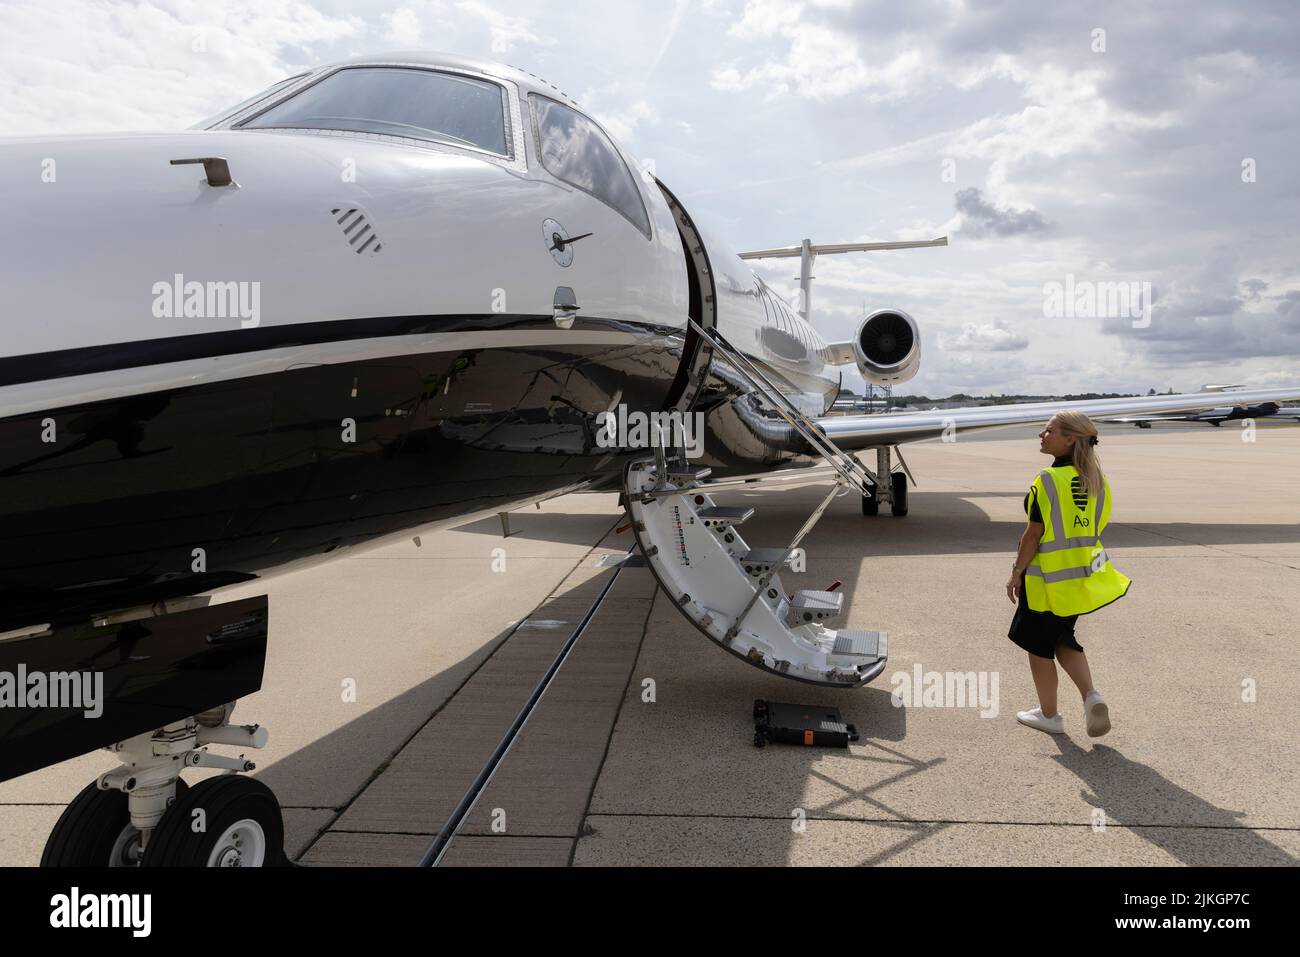 Passenger travelling on a private jet from a UK airport to avoid the airport delays and cancellations many travellers have suffered this year, England. Stock Photo